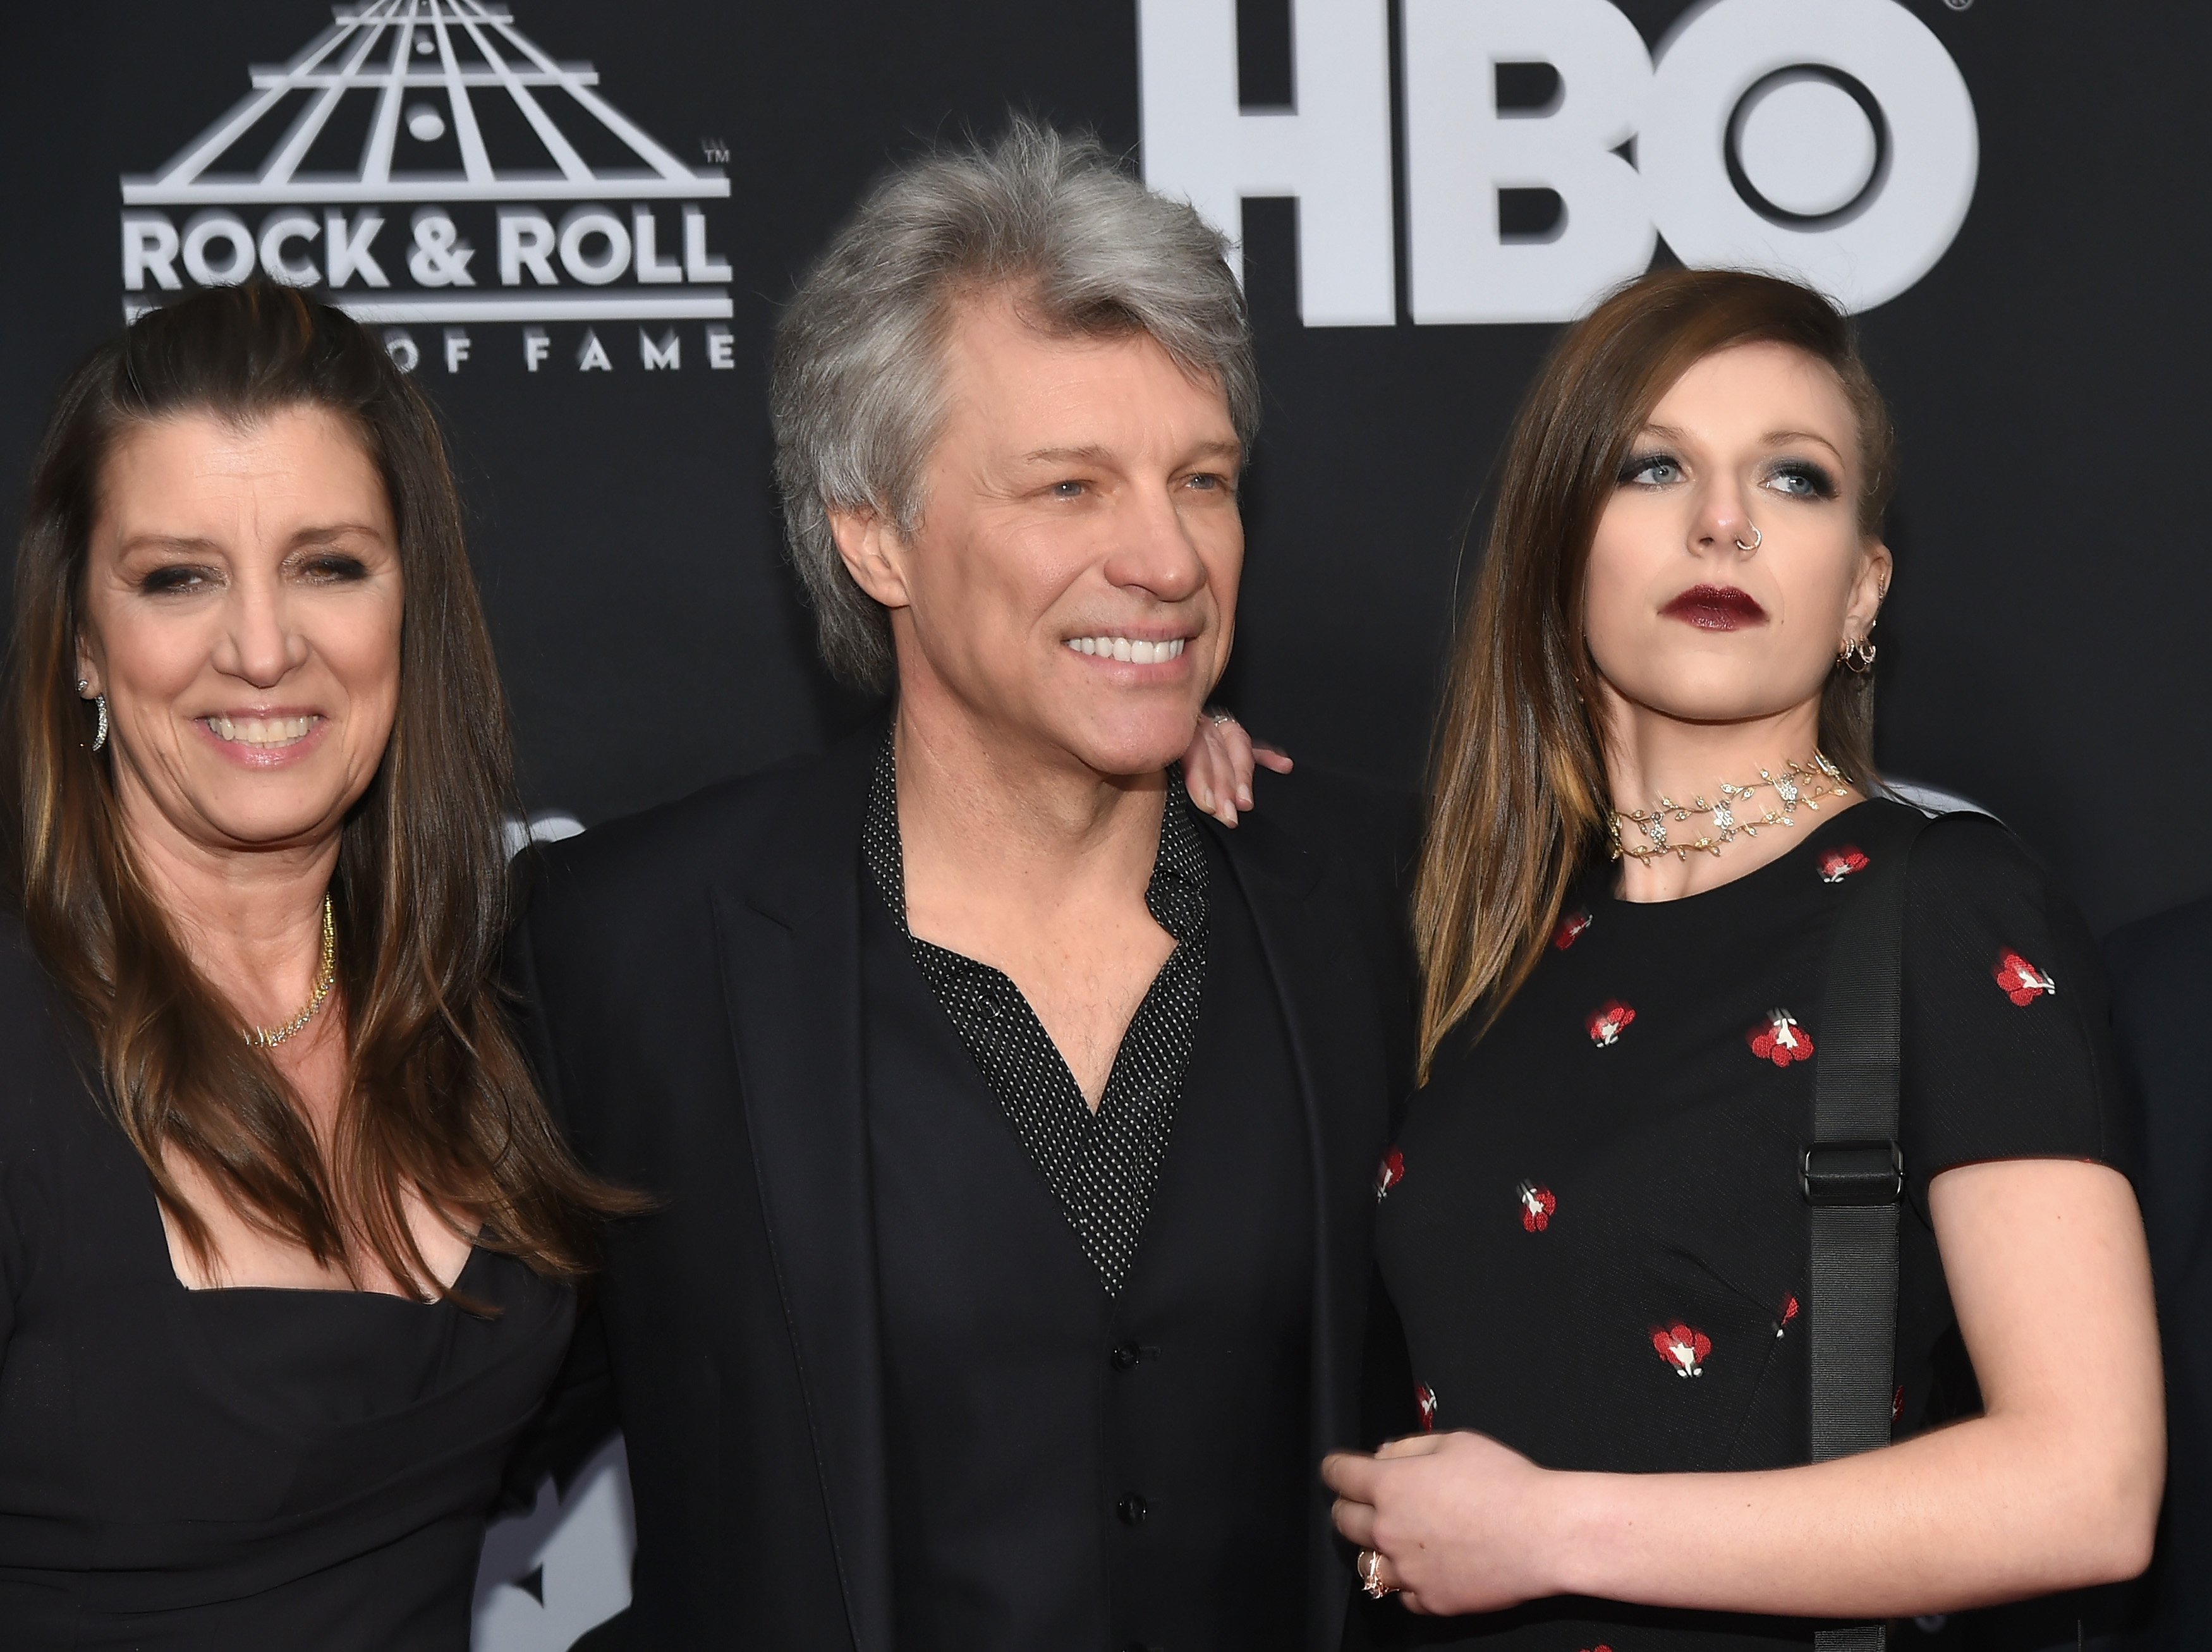 Dorothea Hurley, Jon Bon Jovi, and Stephanie Bongiovi at the 33rd Annual Rock & Roll Hall of Fame Induction Ceremony at Public Auditorium on April 14, 2018, in Cleveland, Ohio. | Source: Getty Images